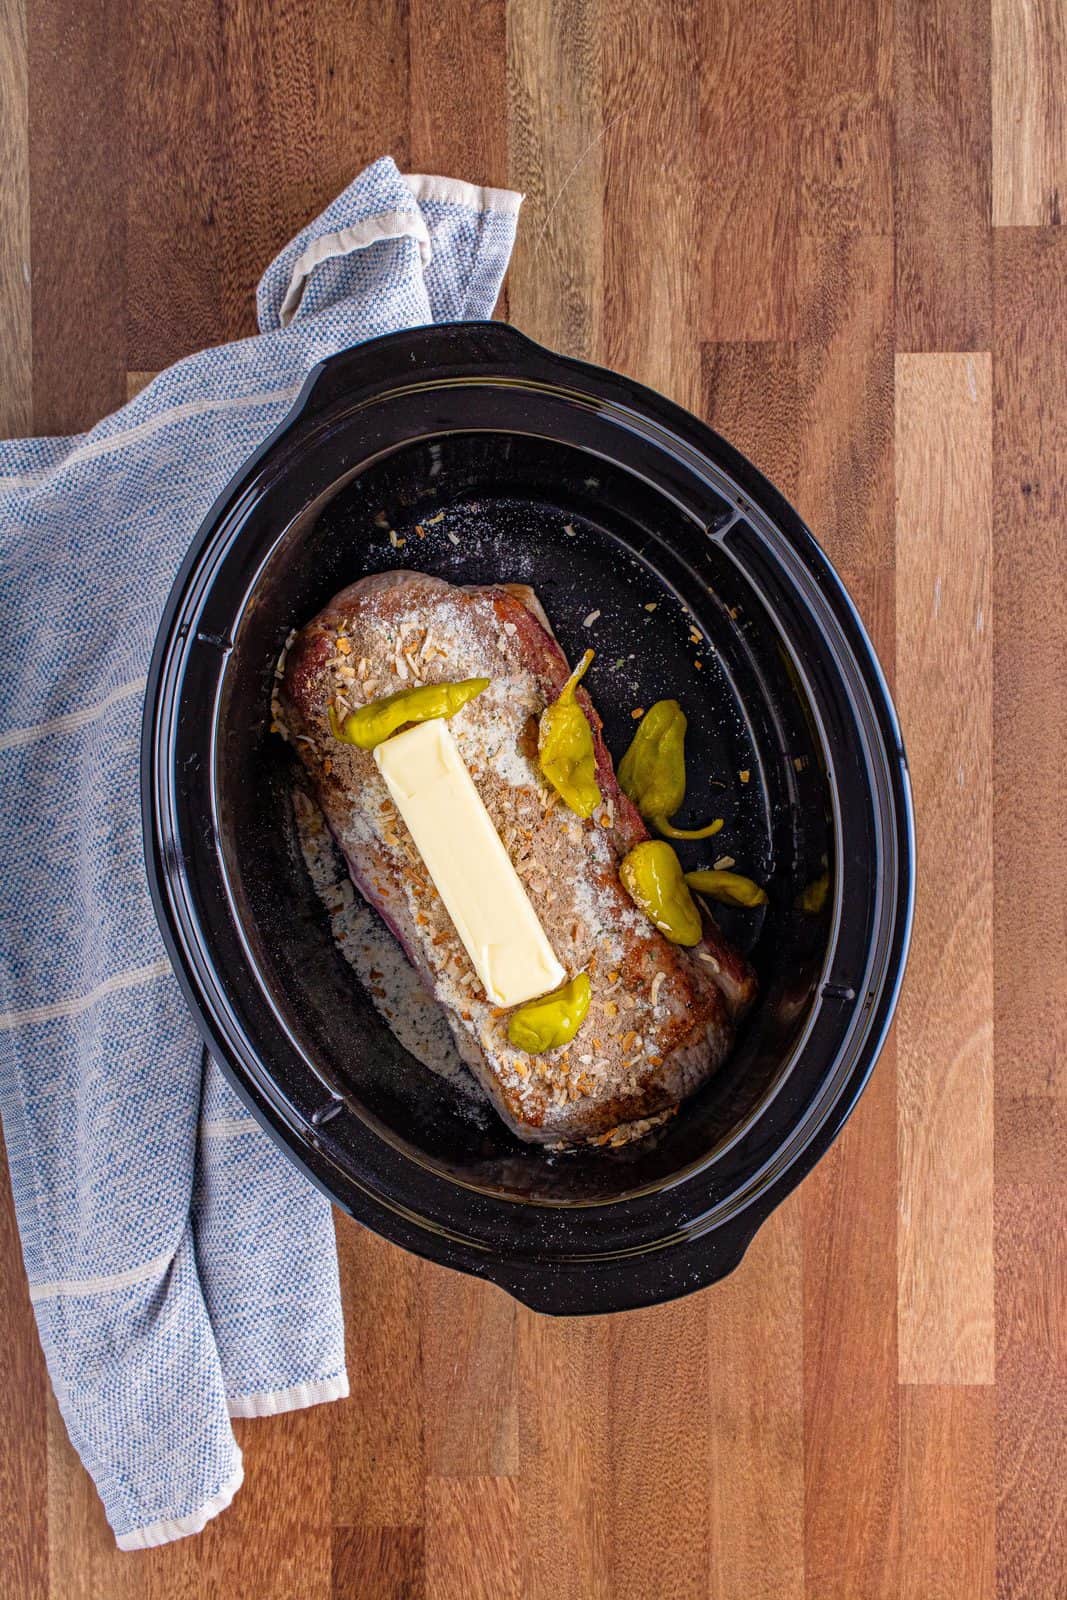 stick of butter placed on a pork roast with peperroncini peppers in an oval slow cooker.